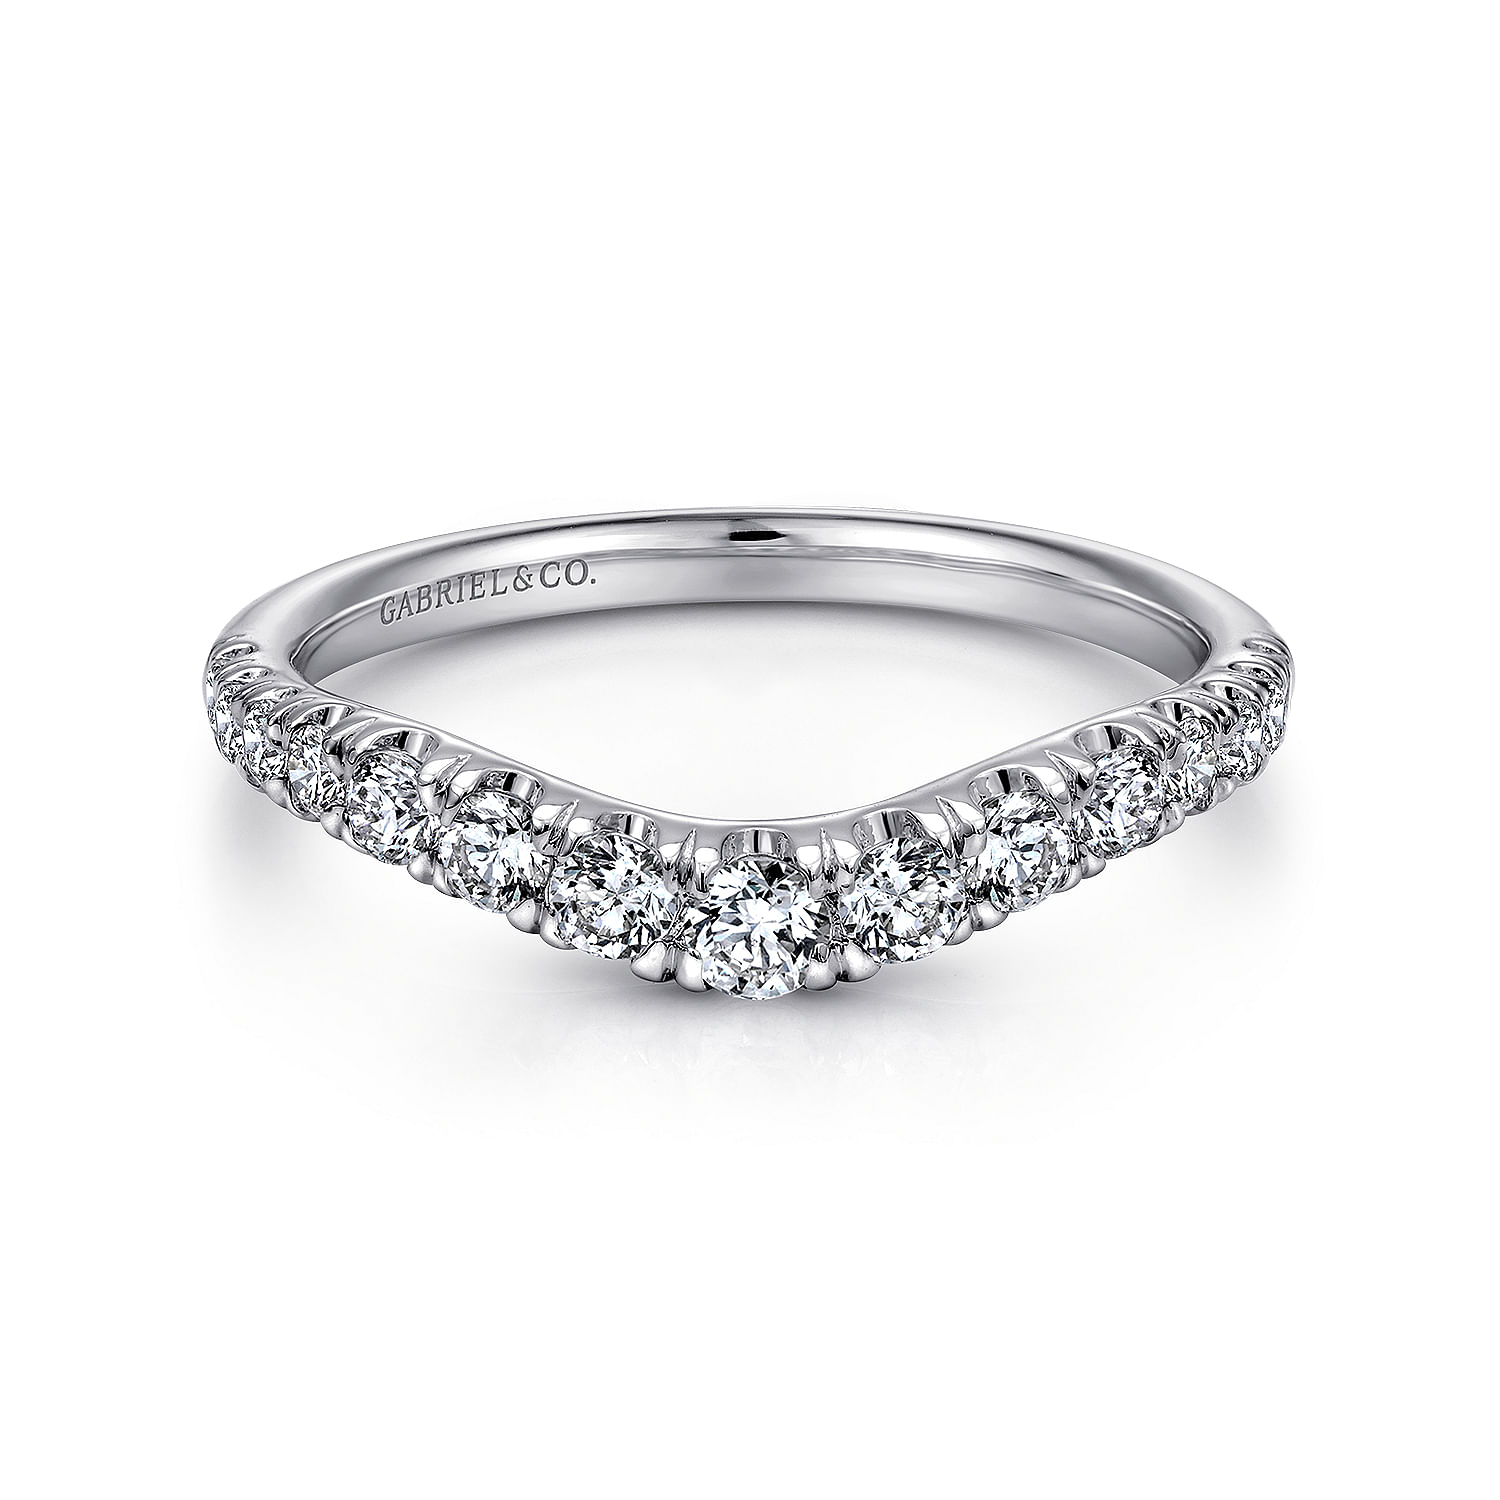 Annecy - Curved 14K White Gold French Pave Set Diamond Wedding Band